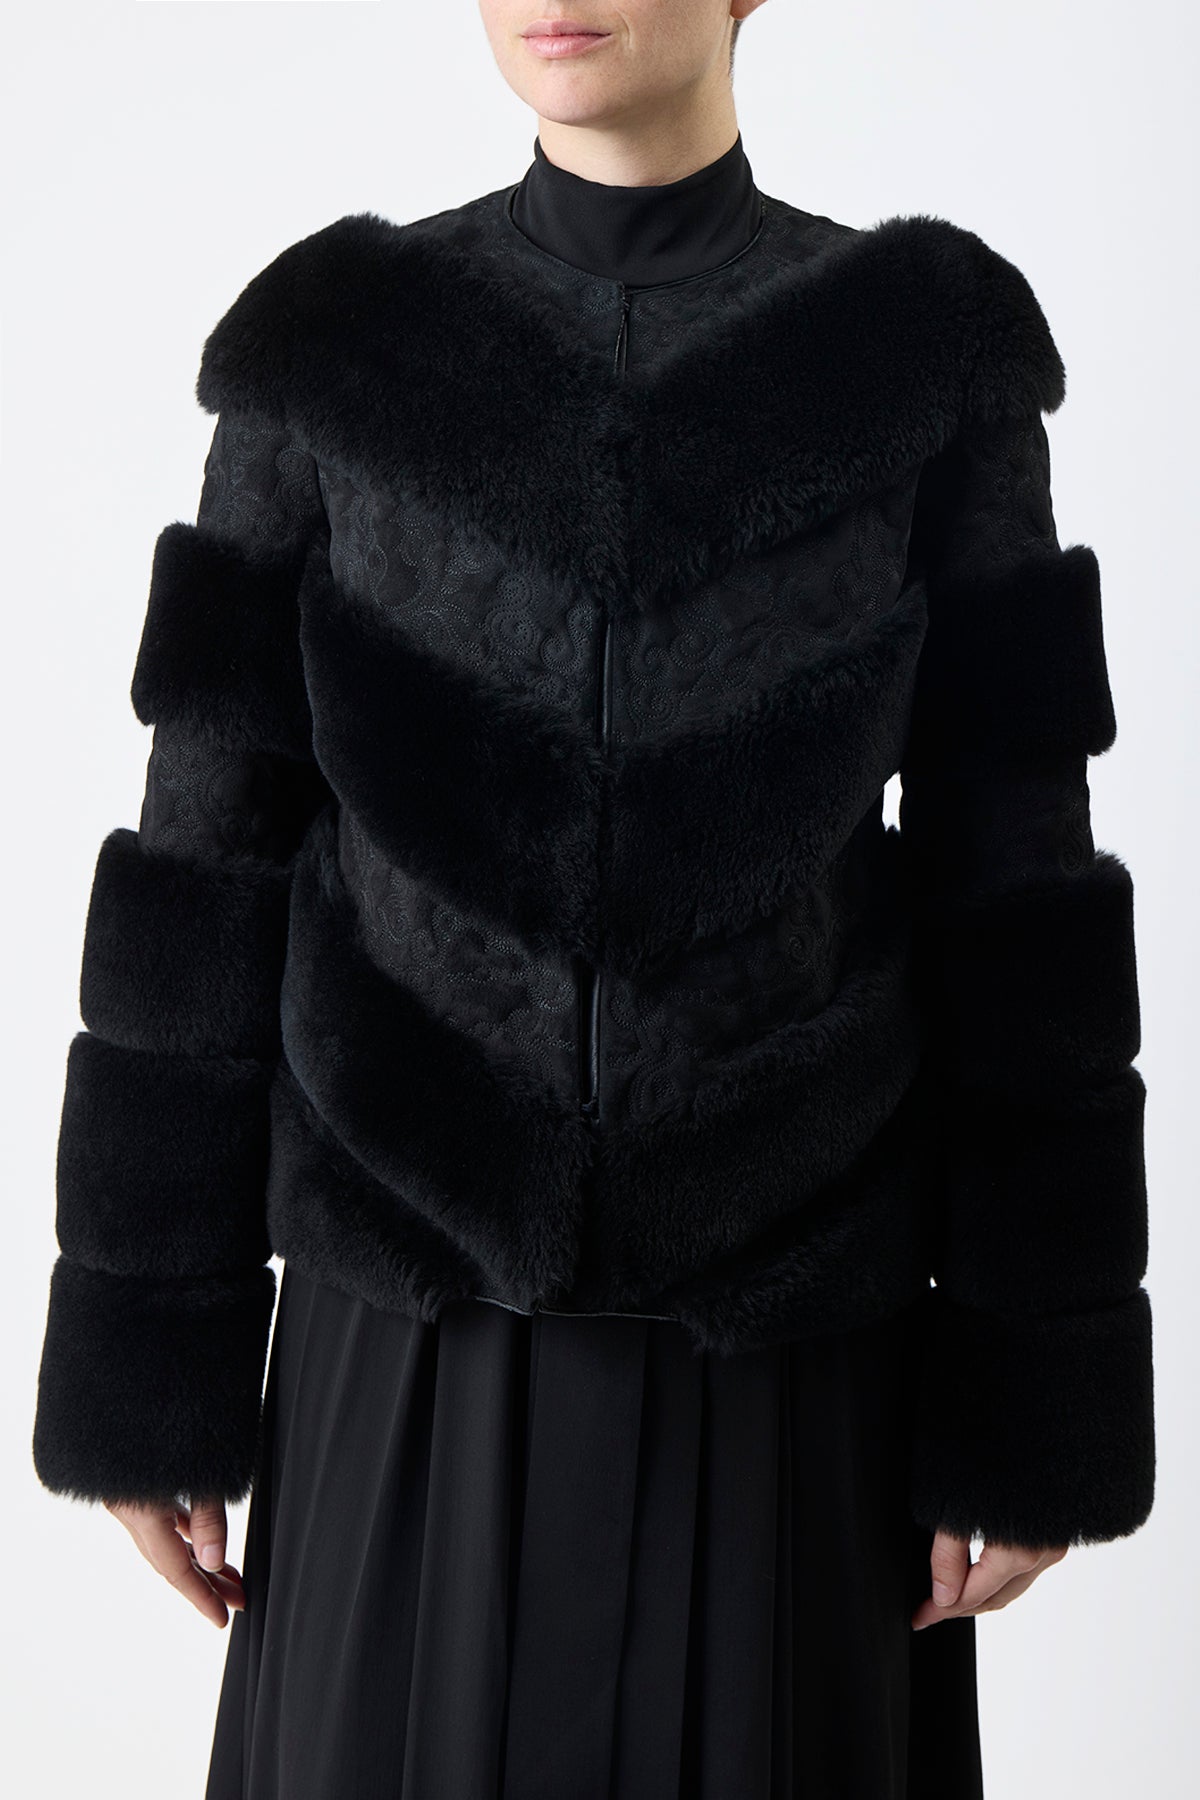 Carys Jacket in Black Suede with Shearling